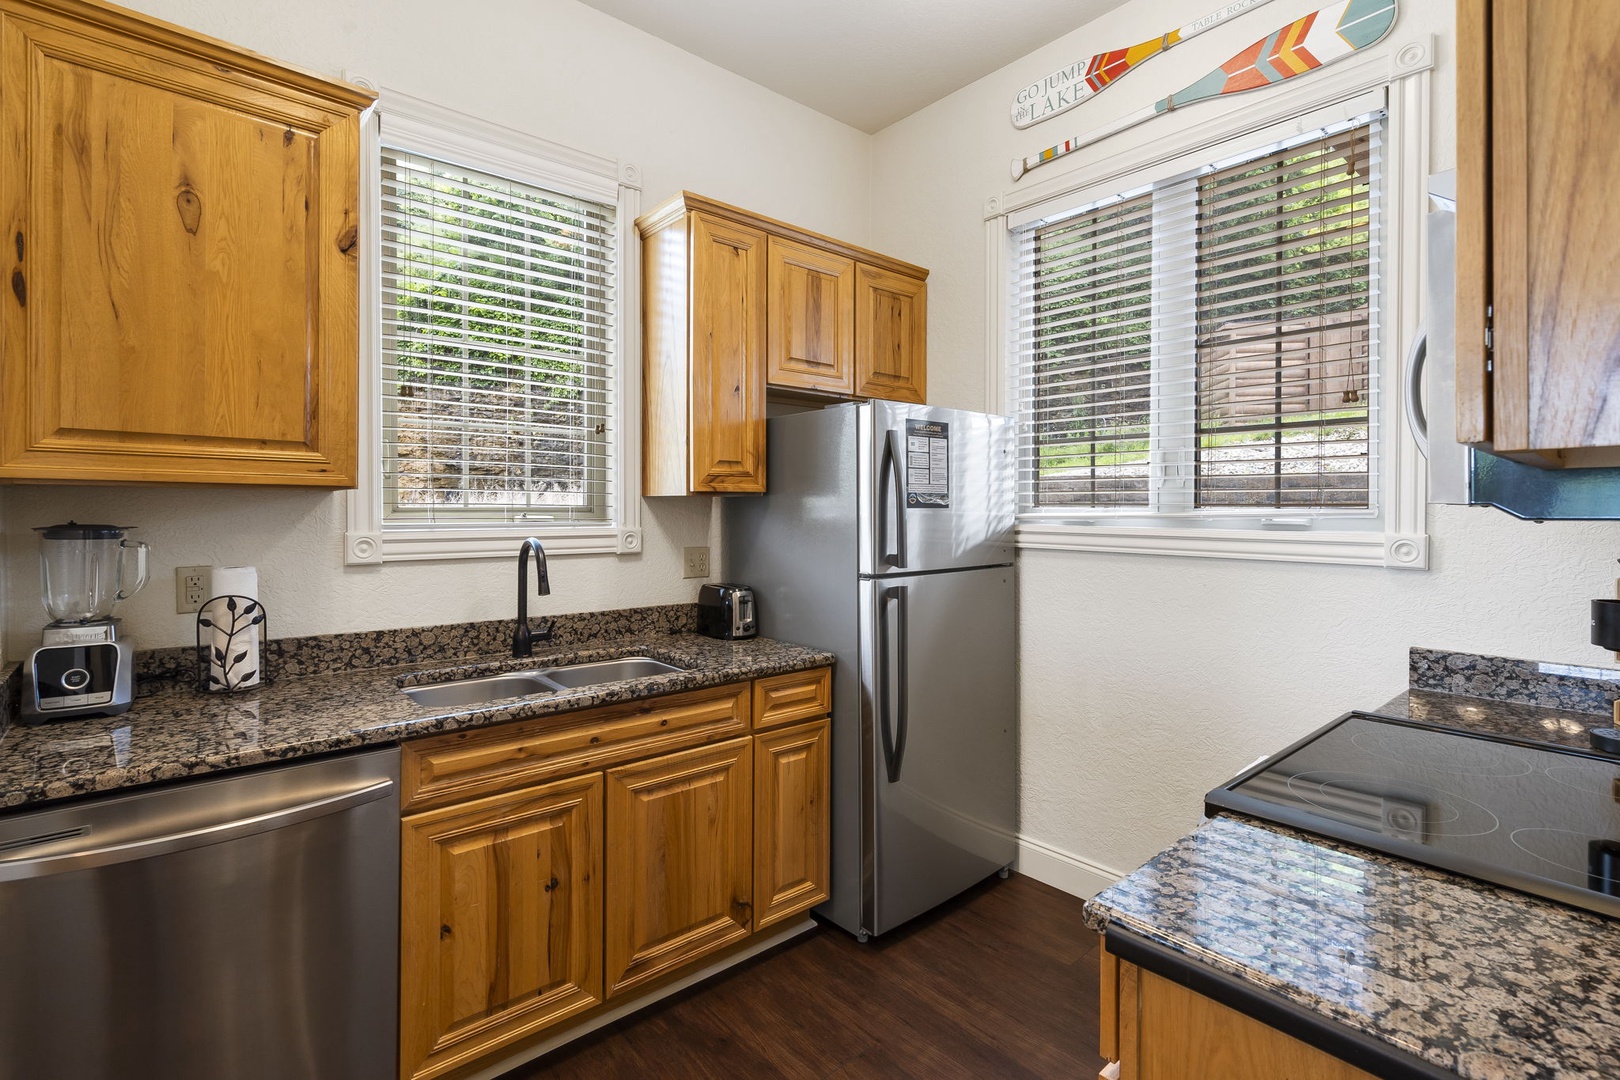 Enjoy all the comforts of home in the well-equipped kitchen